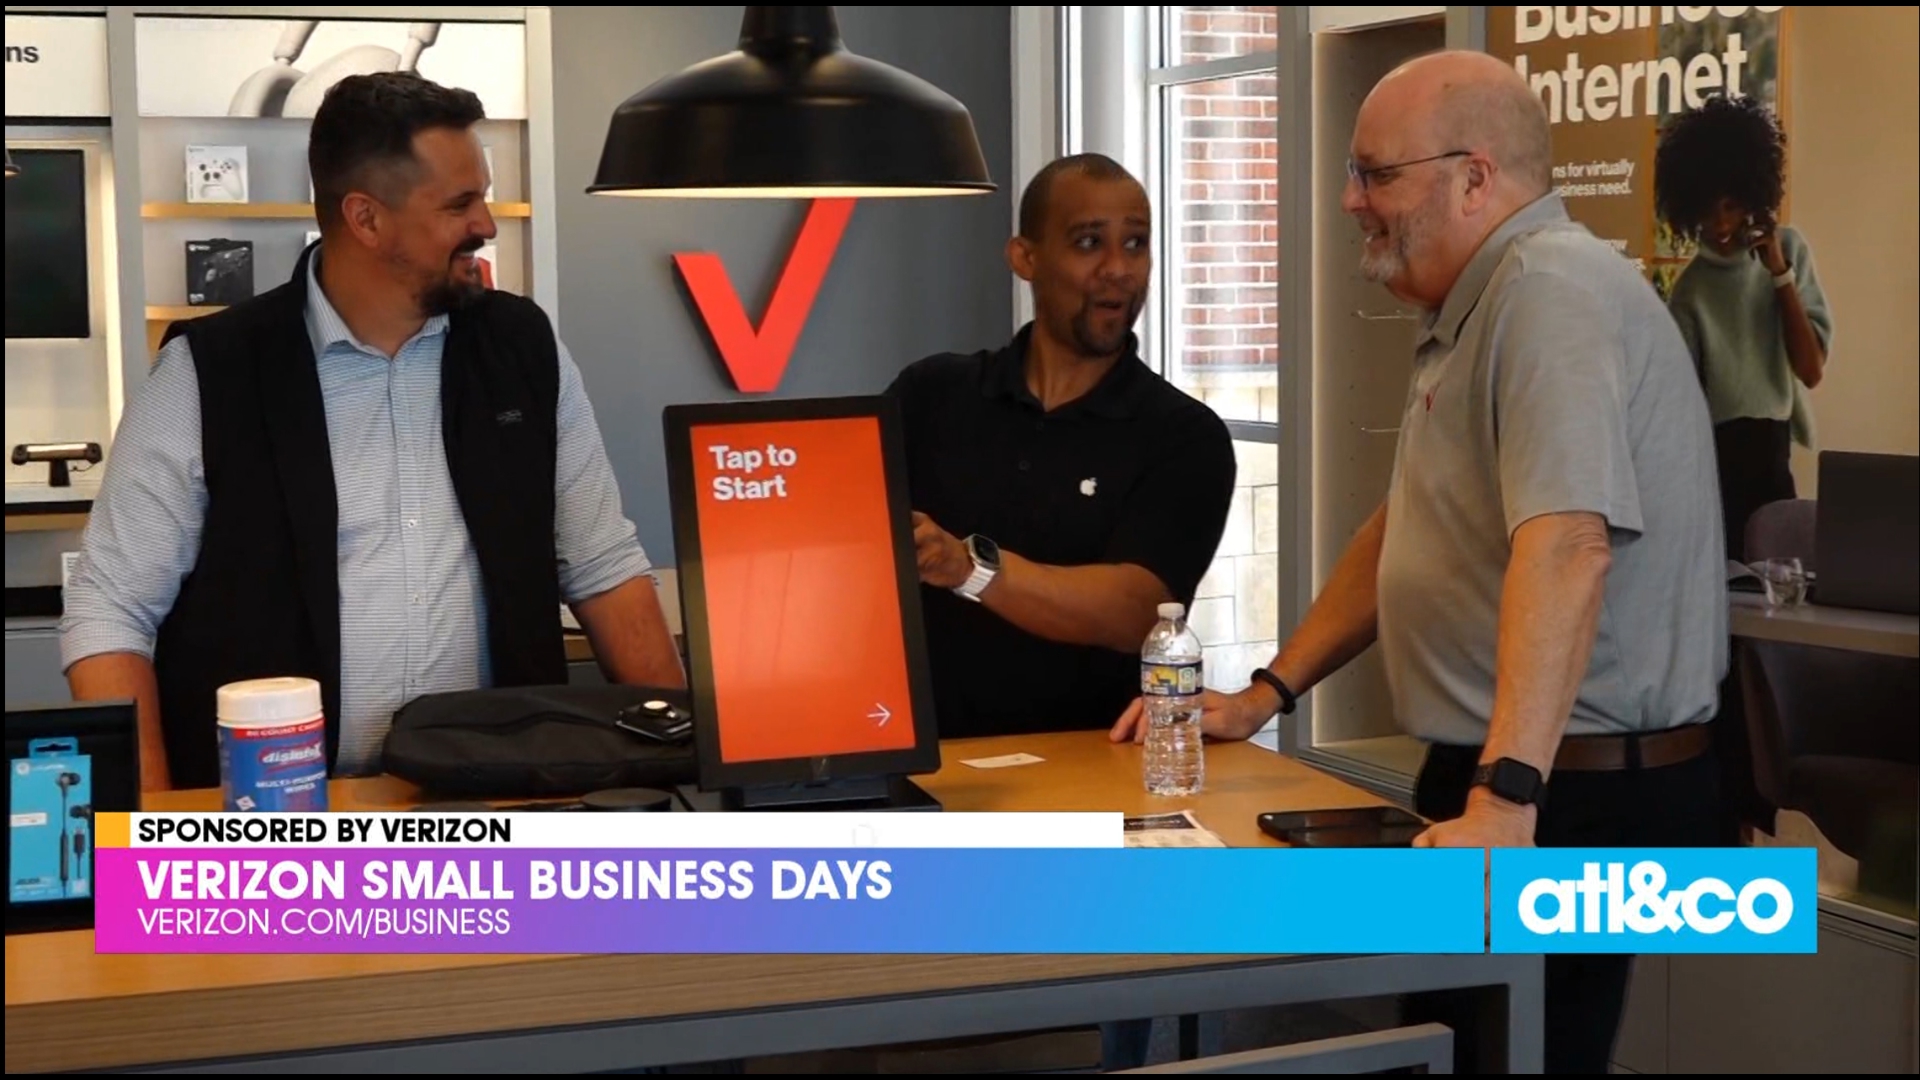 Verizon is helping Small Businesses in Atlanta. Learn more at Verizon.com/Business | PAIN CONTENT